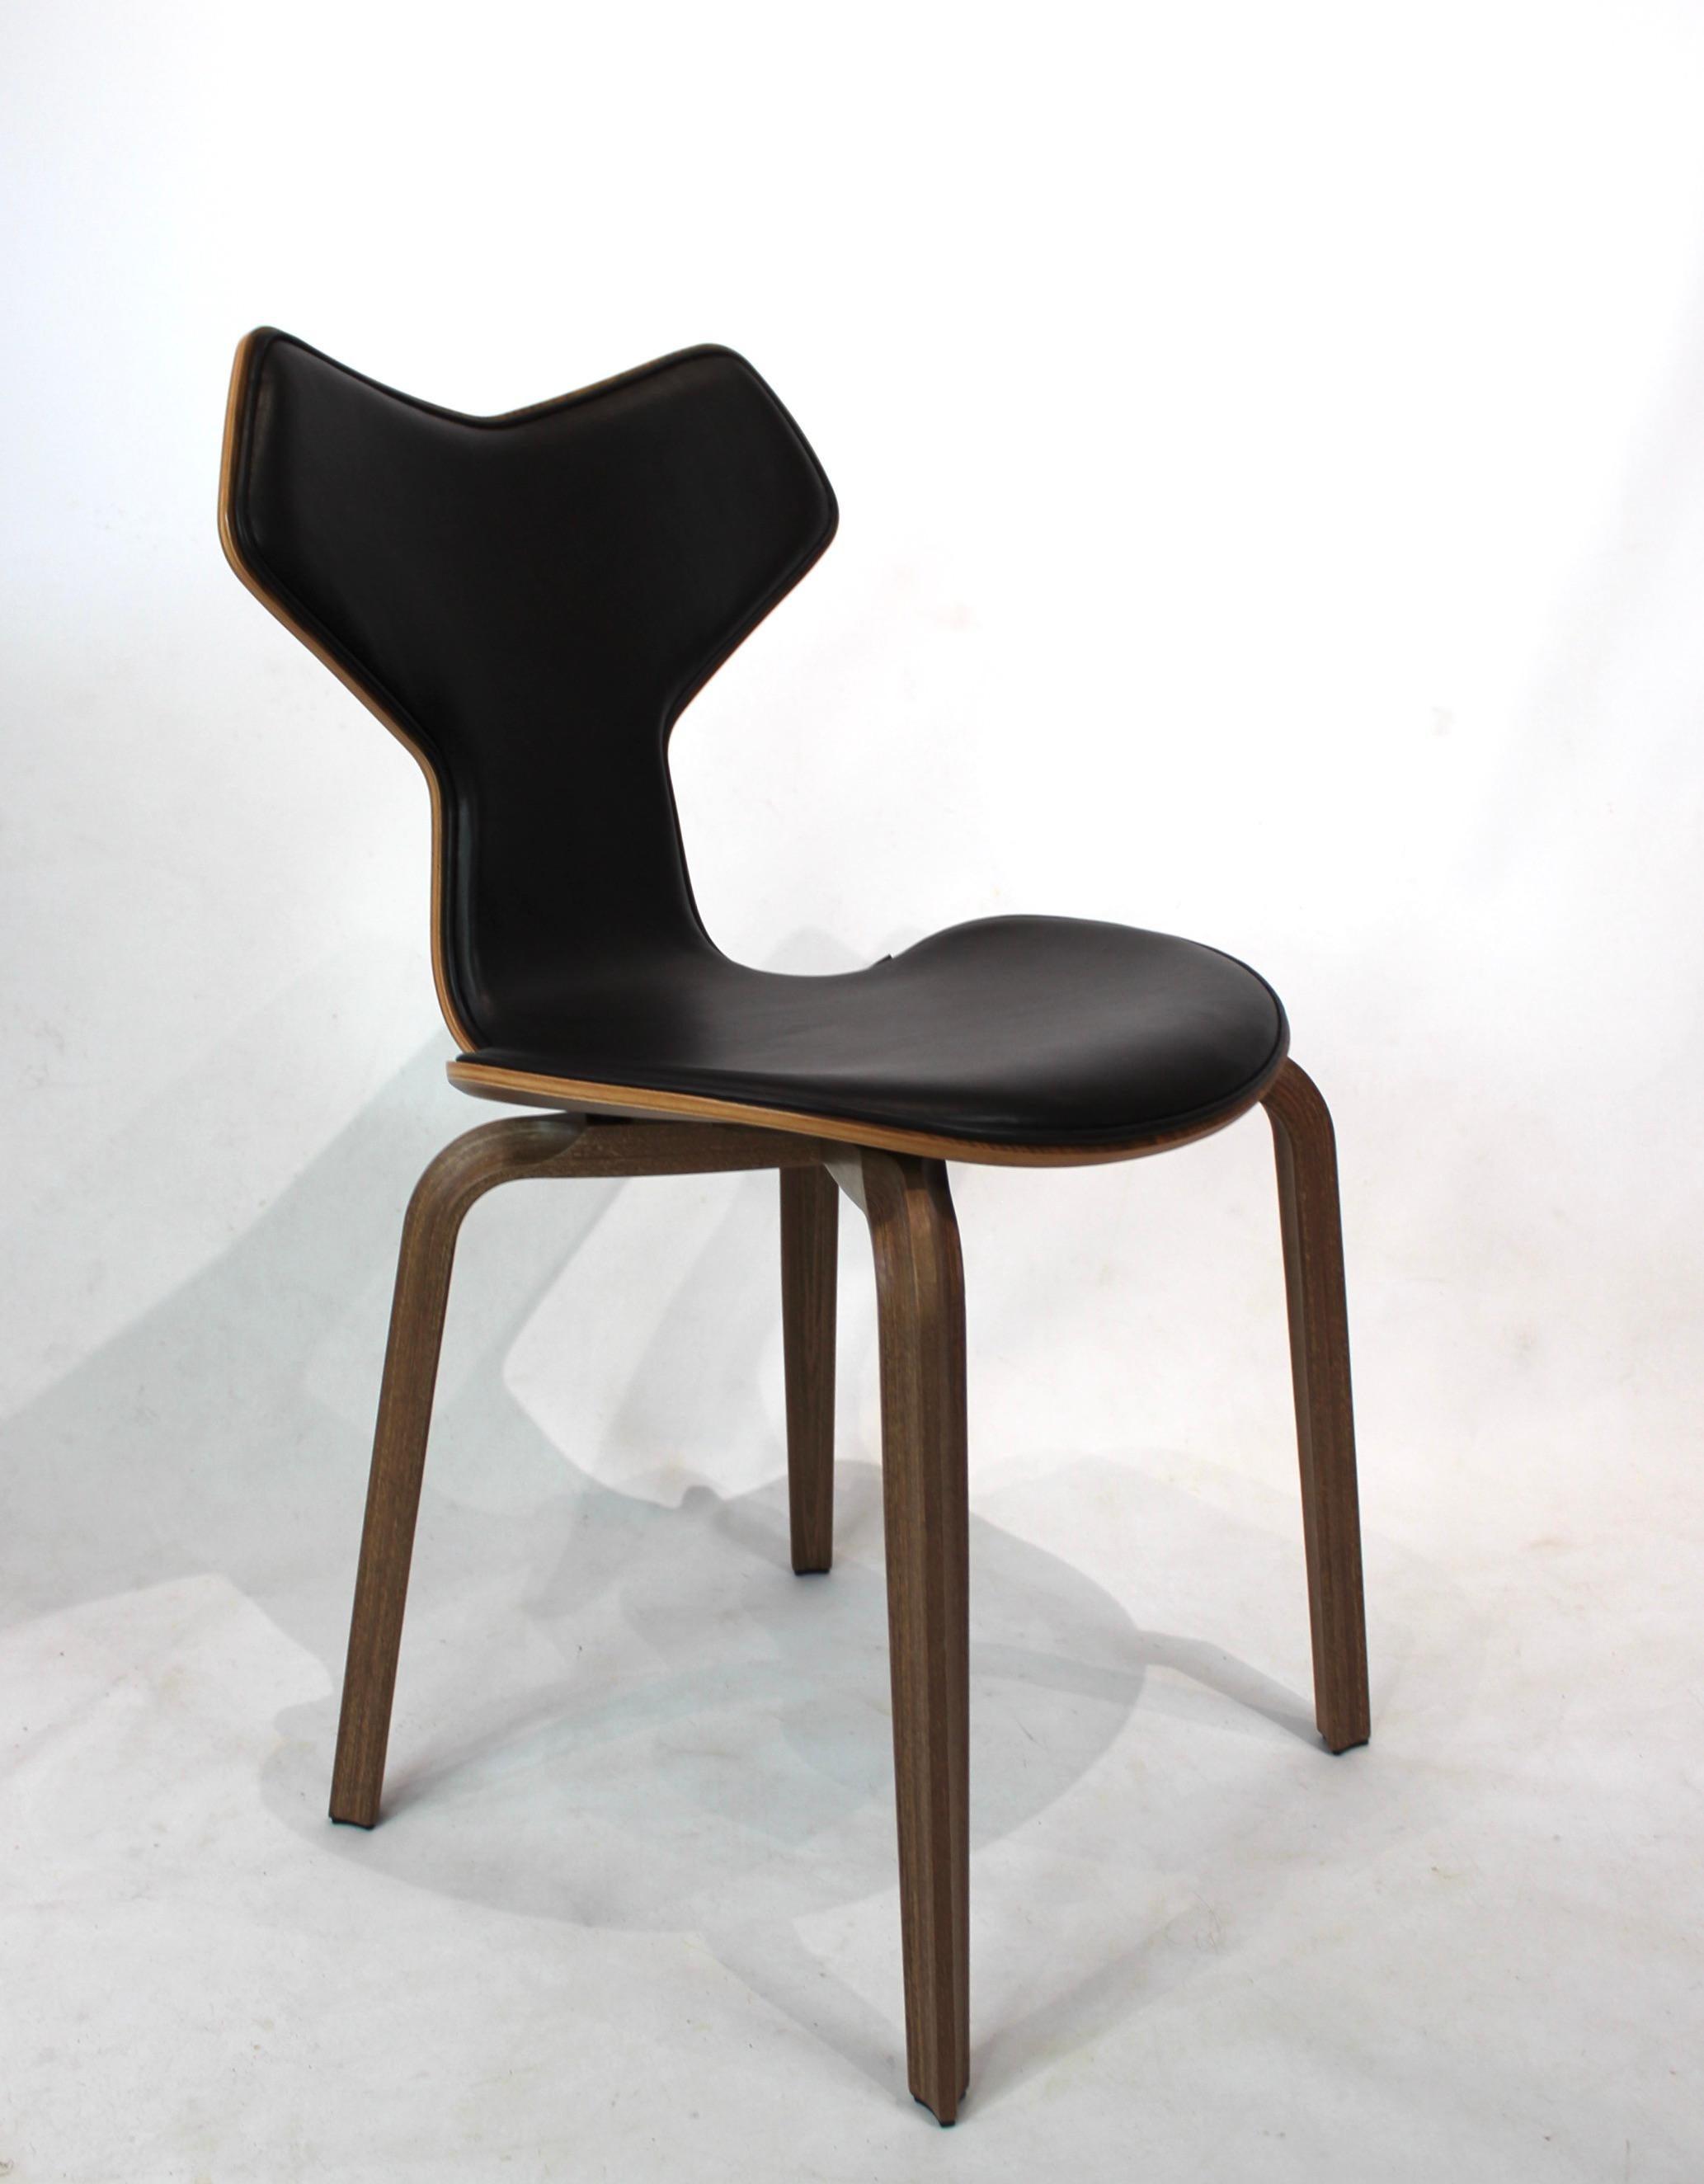 A pair of Grand Prix chairs, model 4130, of Walnut veneer and black leather, designed by Arne Jacobsen and manufactured by Fritz Hansen in 2018. The chairs are in perfect condition.
Measures: H 80.5 cm, W 50 cm, D 51 cm and SH 46 cm.